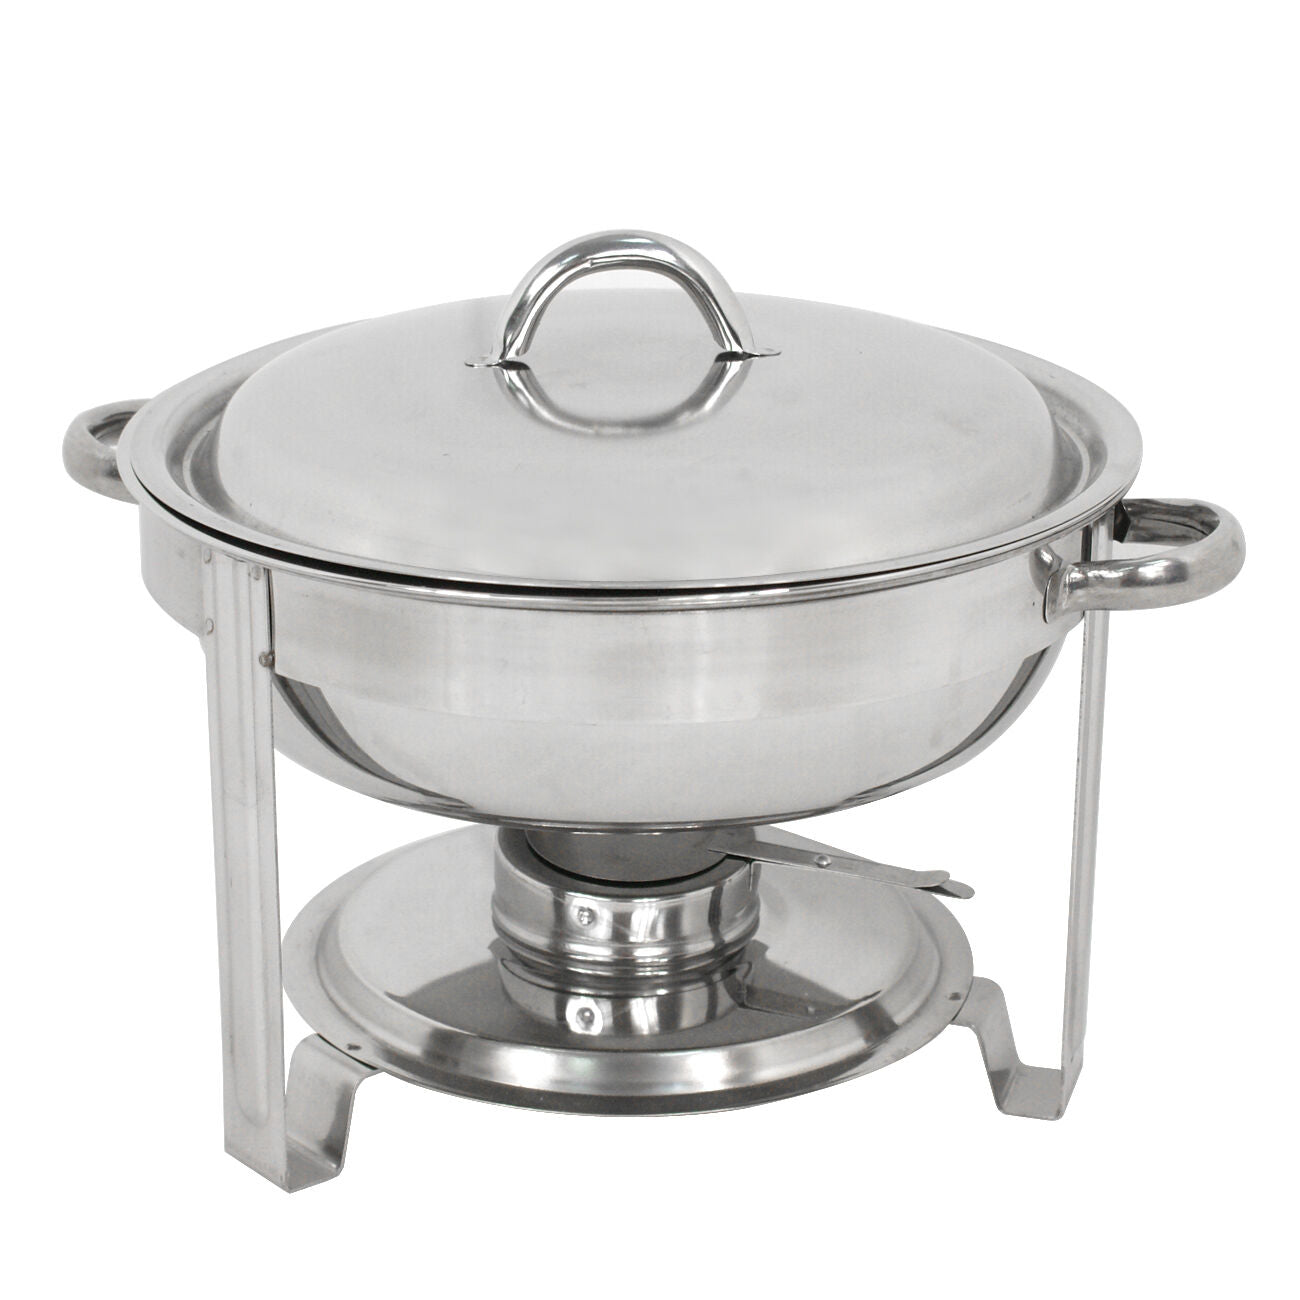 5 Pack Round Chafing Dish 5 Quart Stainless Steel Full Size Tray Buffet Catering